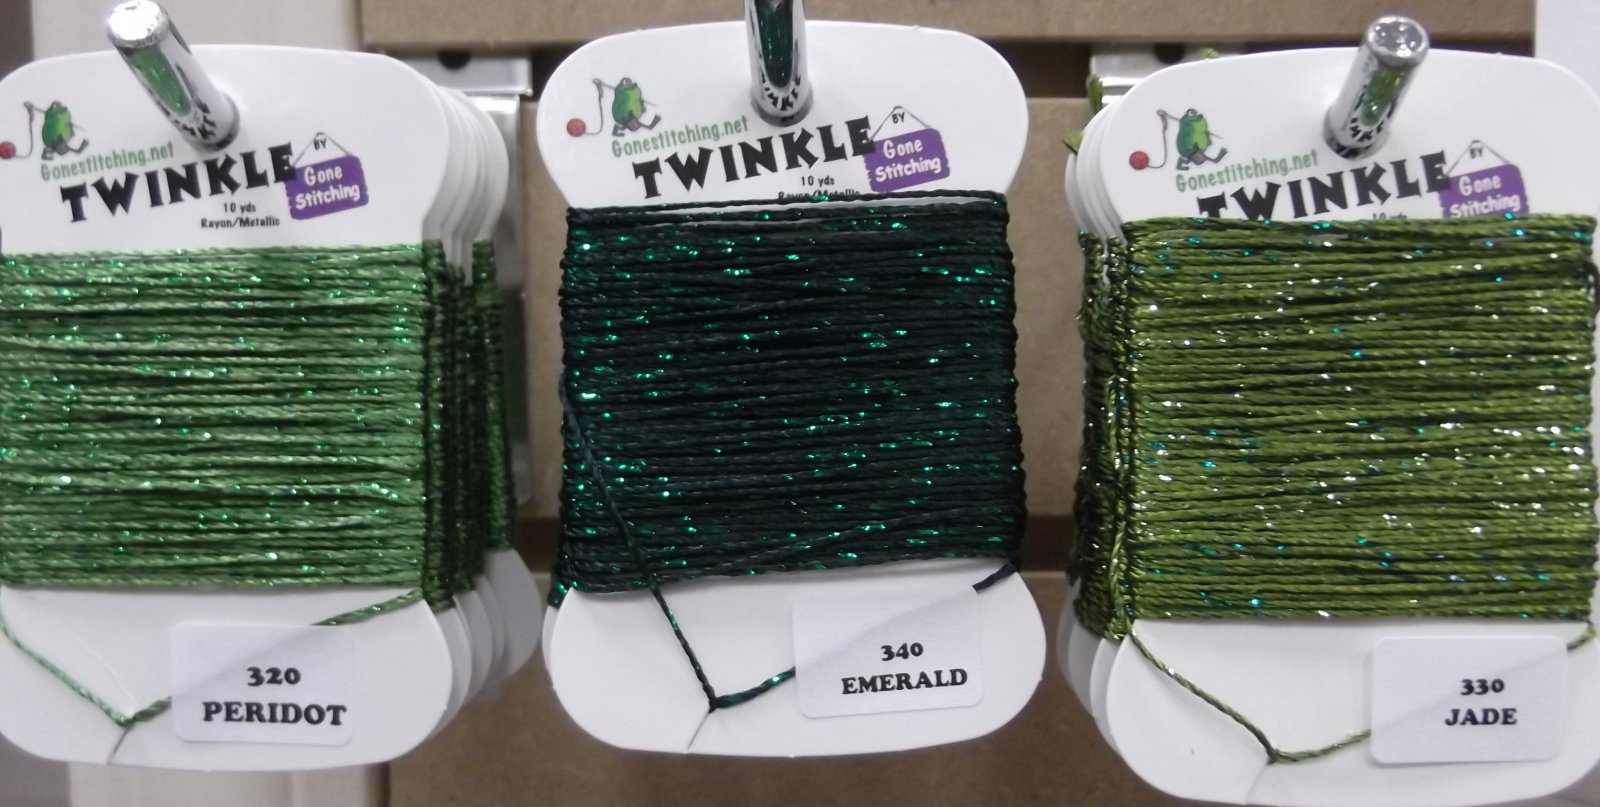 Twinkle by Gone Stitching